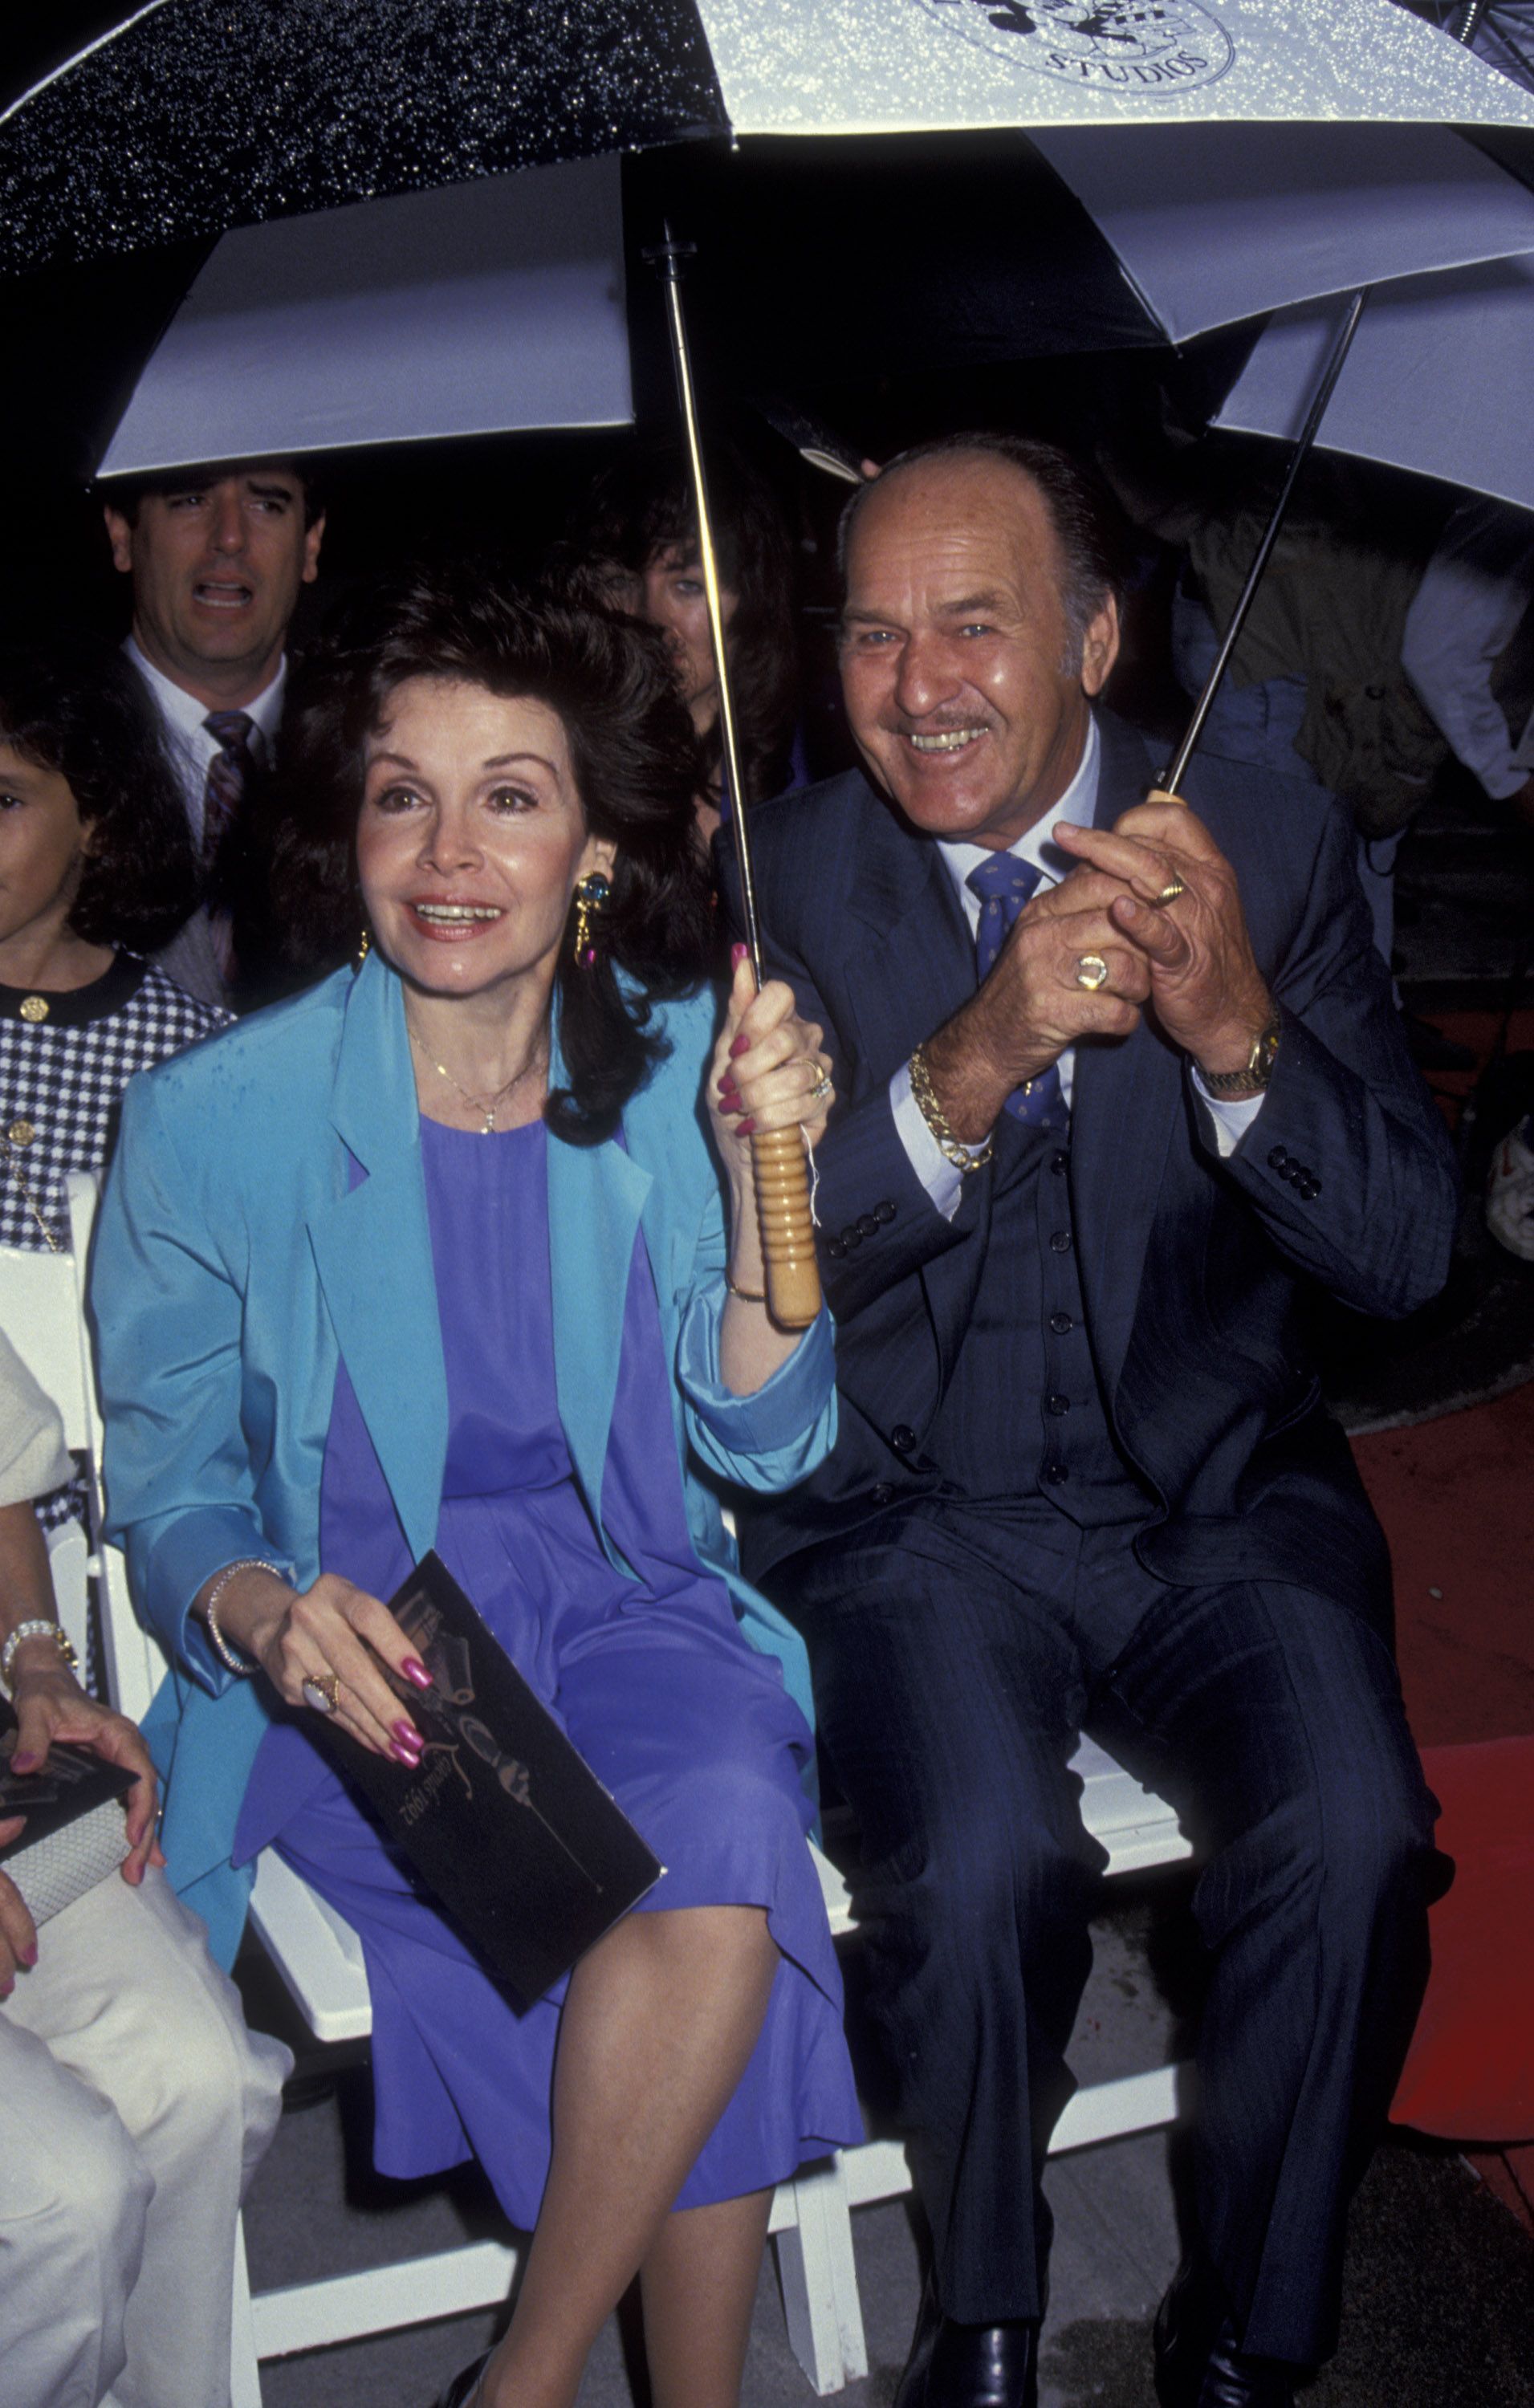 Annette Funicello and Glen Holt during the Disney Legends Awards at Walt Disney Studios in Burbank, California, United States. | Source: Getty Images